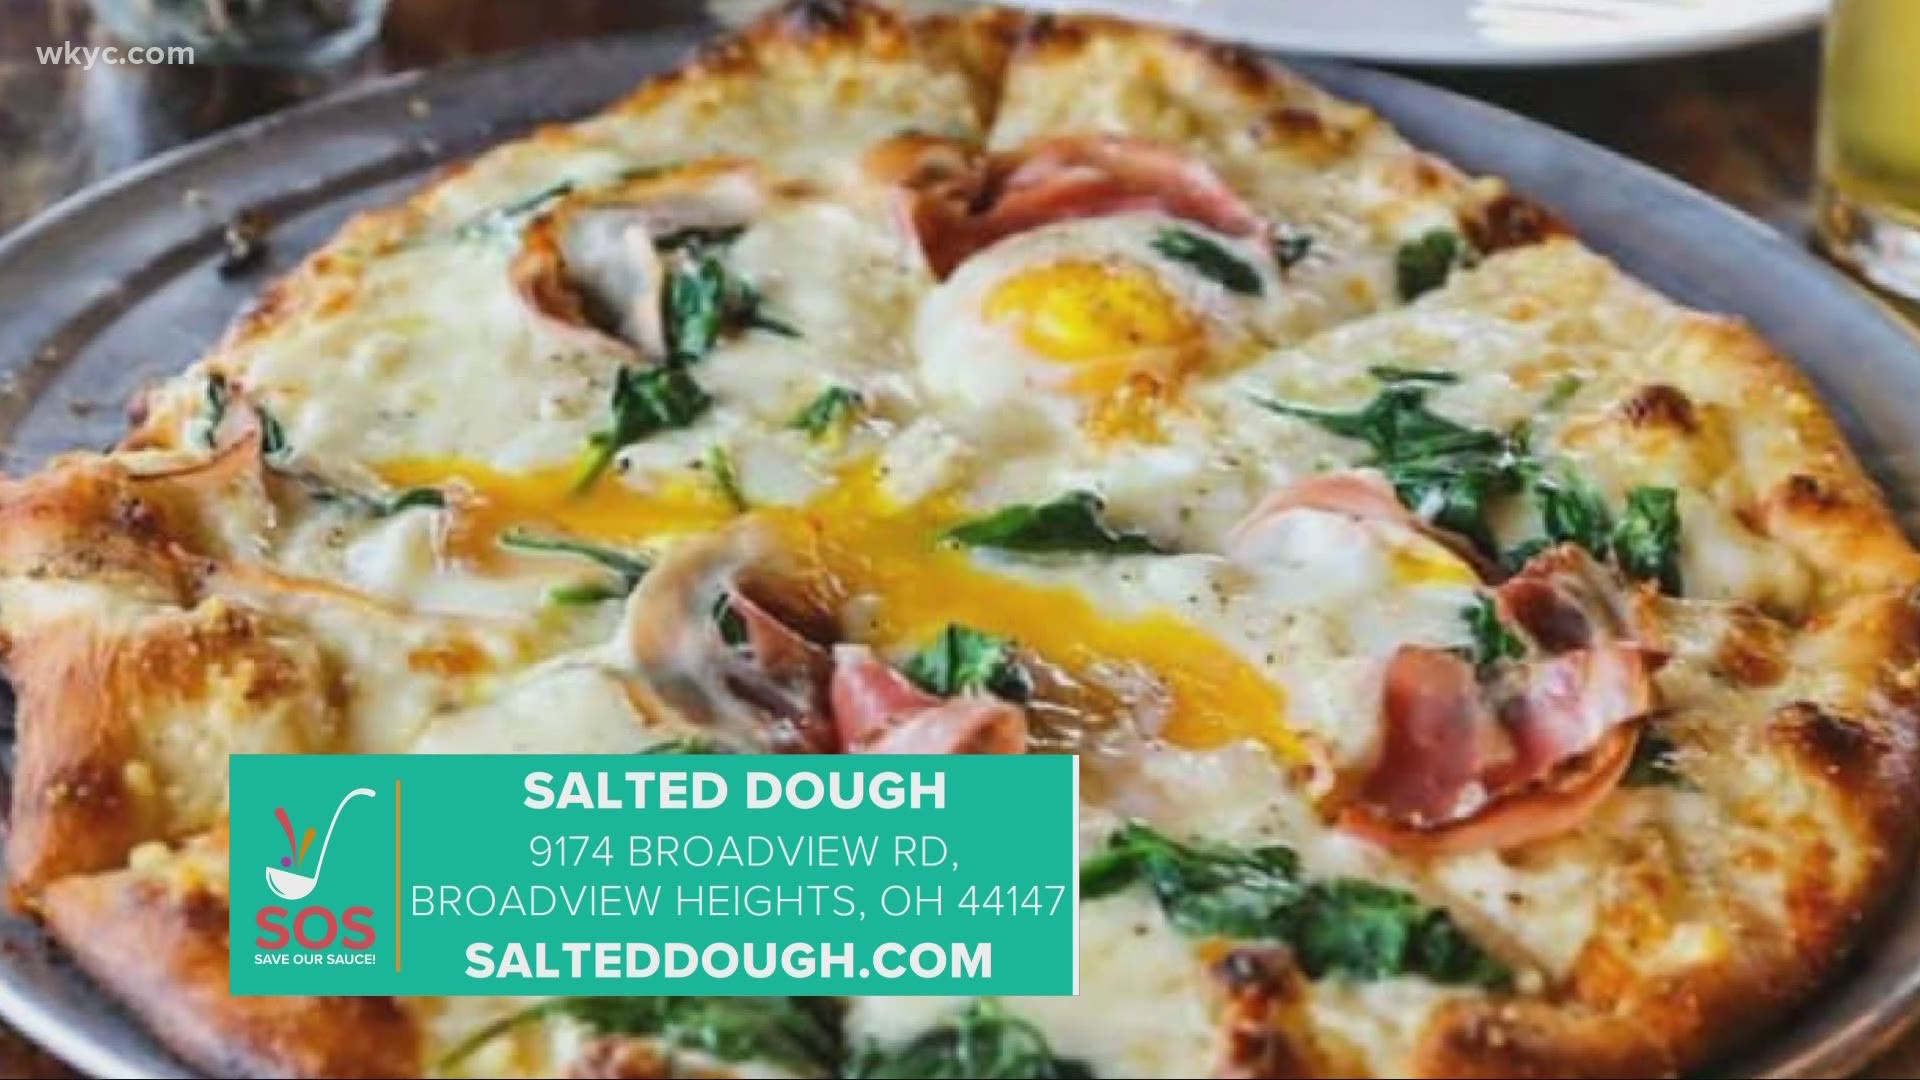 We're highlighting Salted Dough as we continue the 'Save Our Sauce' campaign to show support for Northeast Ohio restaurants amid the COVID-19 pandemic.